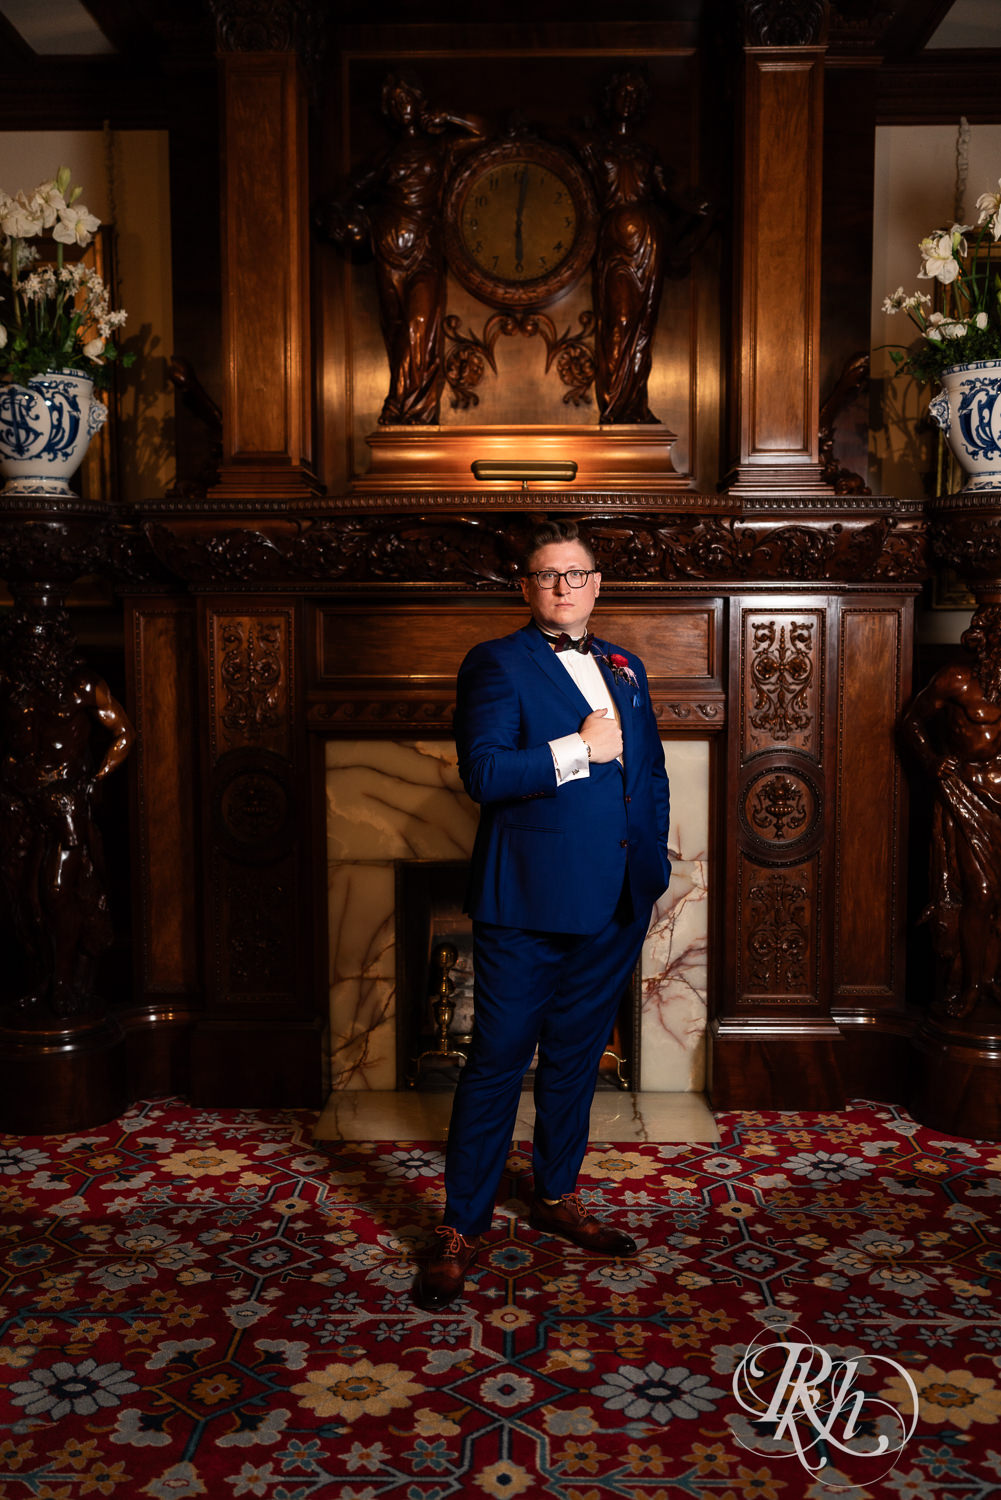 Groom in blue suit stands in front of fireplace at American Swedish Institute in Minnesota.